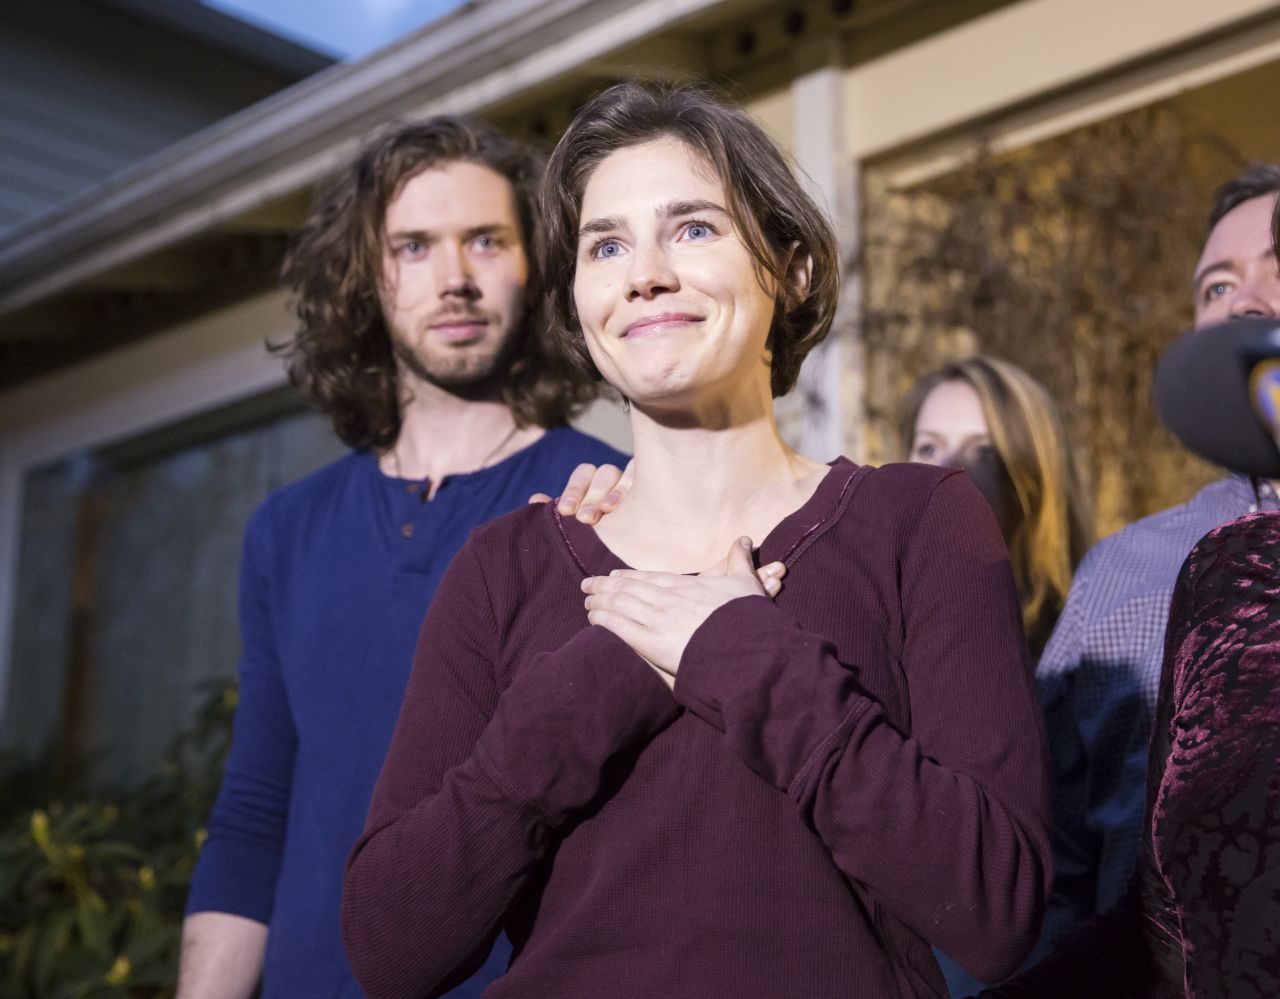 Amanda Knox at her parents' home in Seattle, Washington, on March 27, 2015. Knox and Raffaele Sollecito (not pictured) were acquitted by Italy's highest court in the murder of British student Meredith Kercher. 